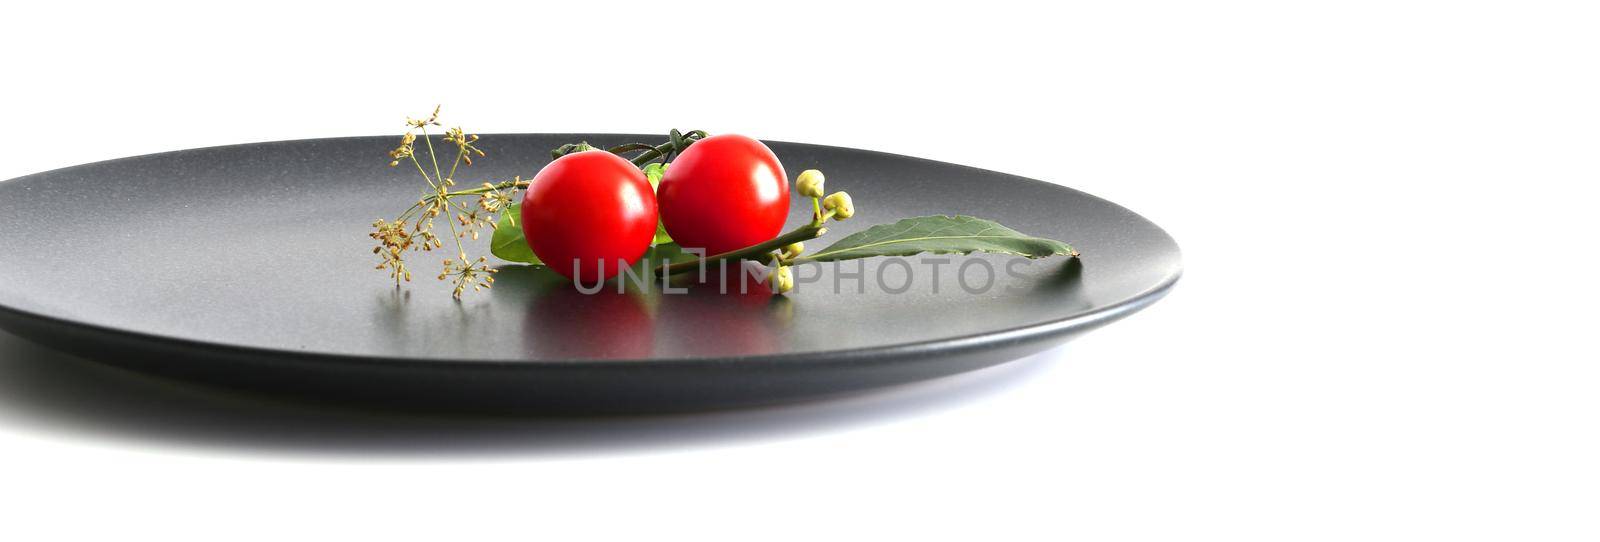 Table arrangement with tomato on black plate on white background. Food preparation, presentation